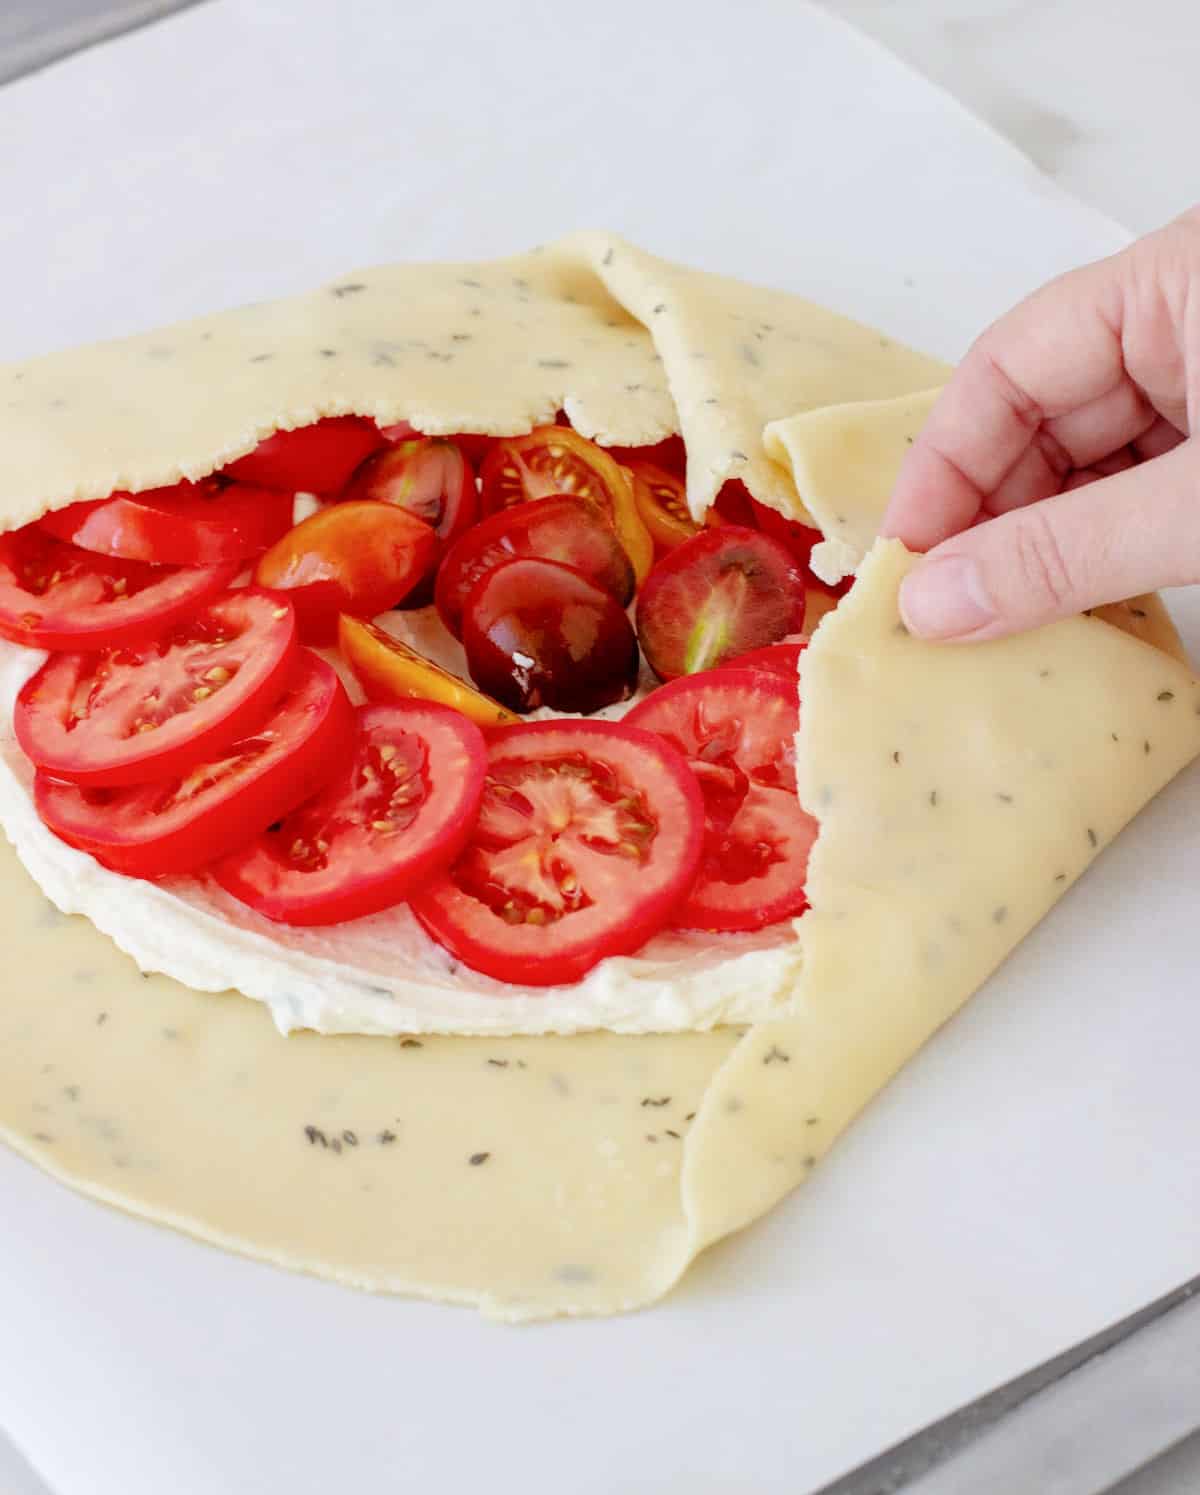 Hand folding pie crust over tomato filling in galette placed on white parchment paper.